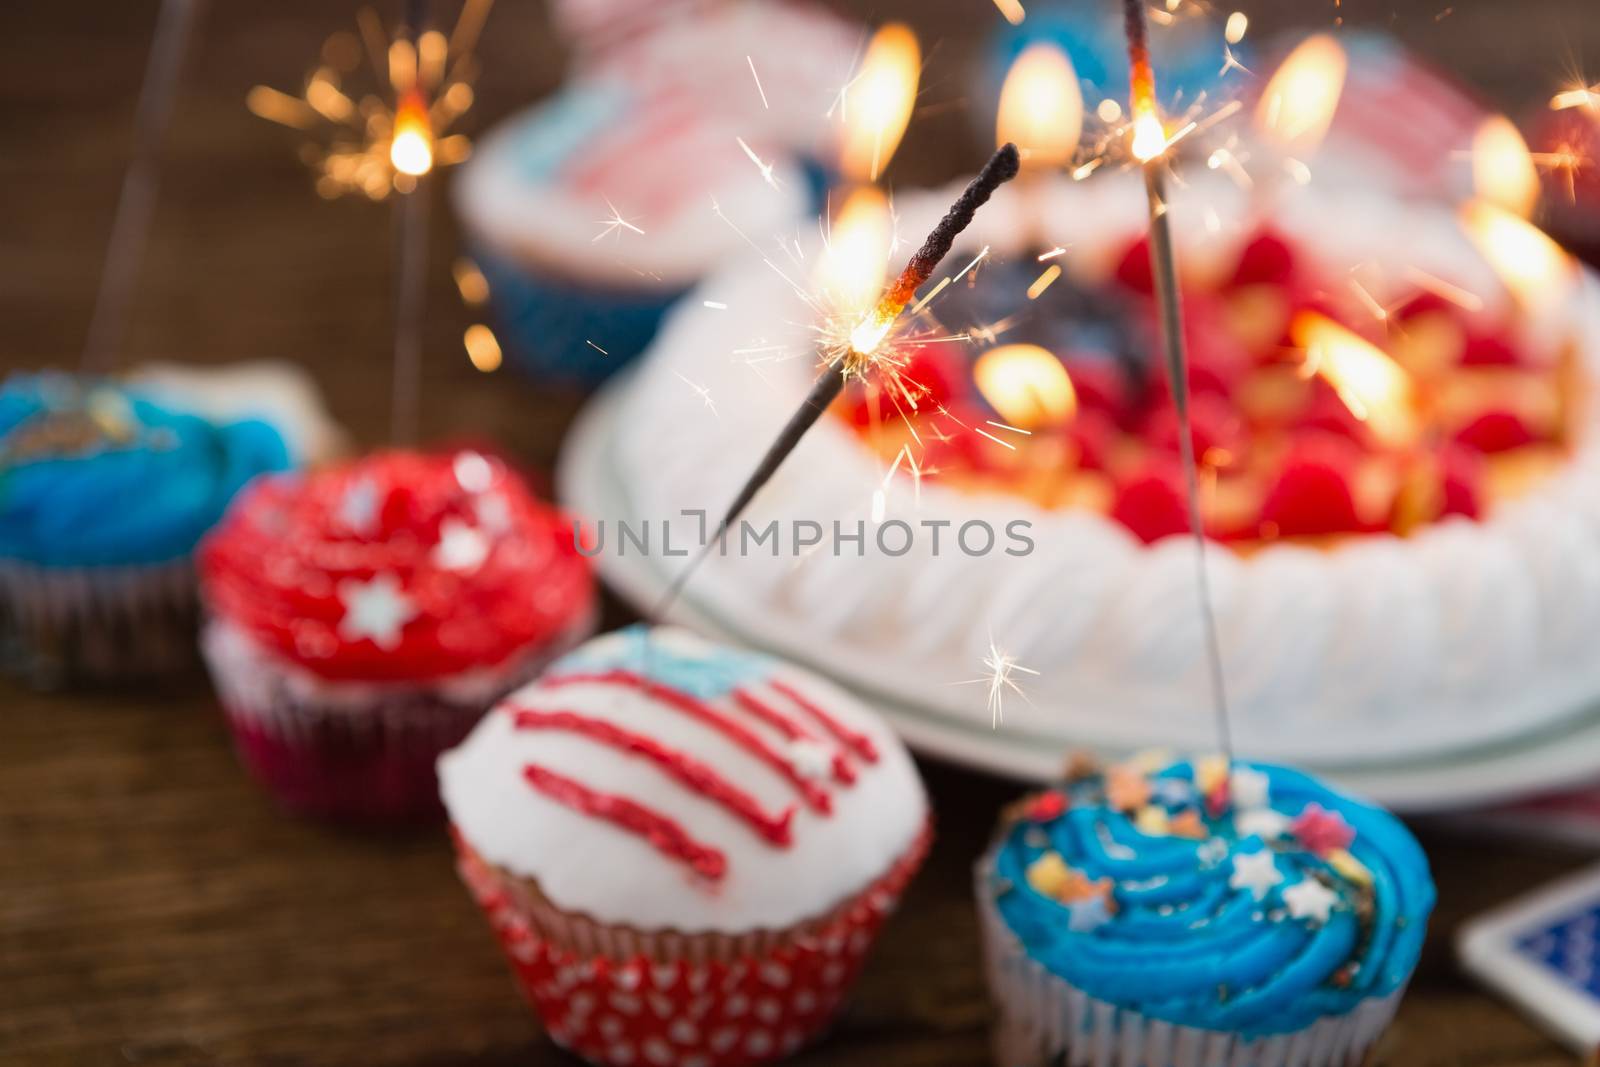 Patriotic 4th of july cake and cupcake arranged on wooden table